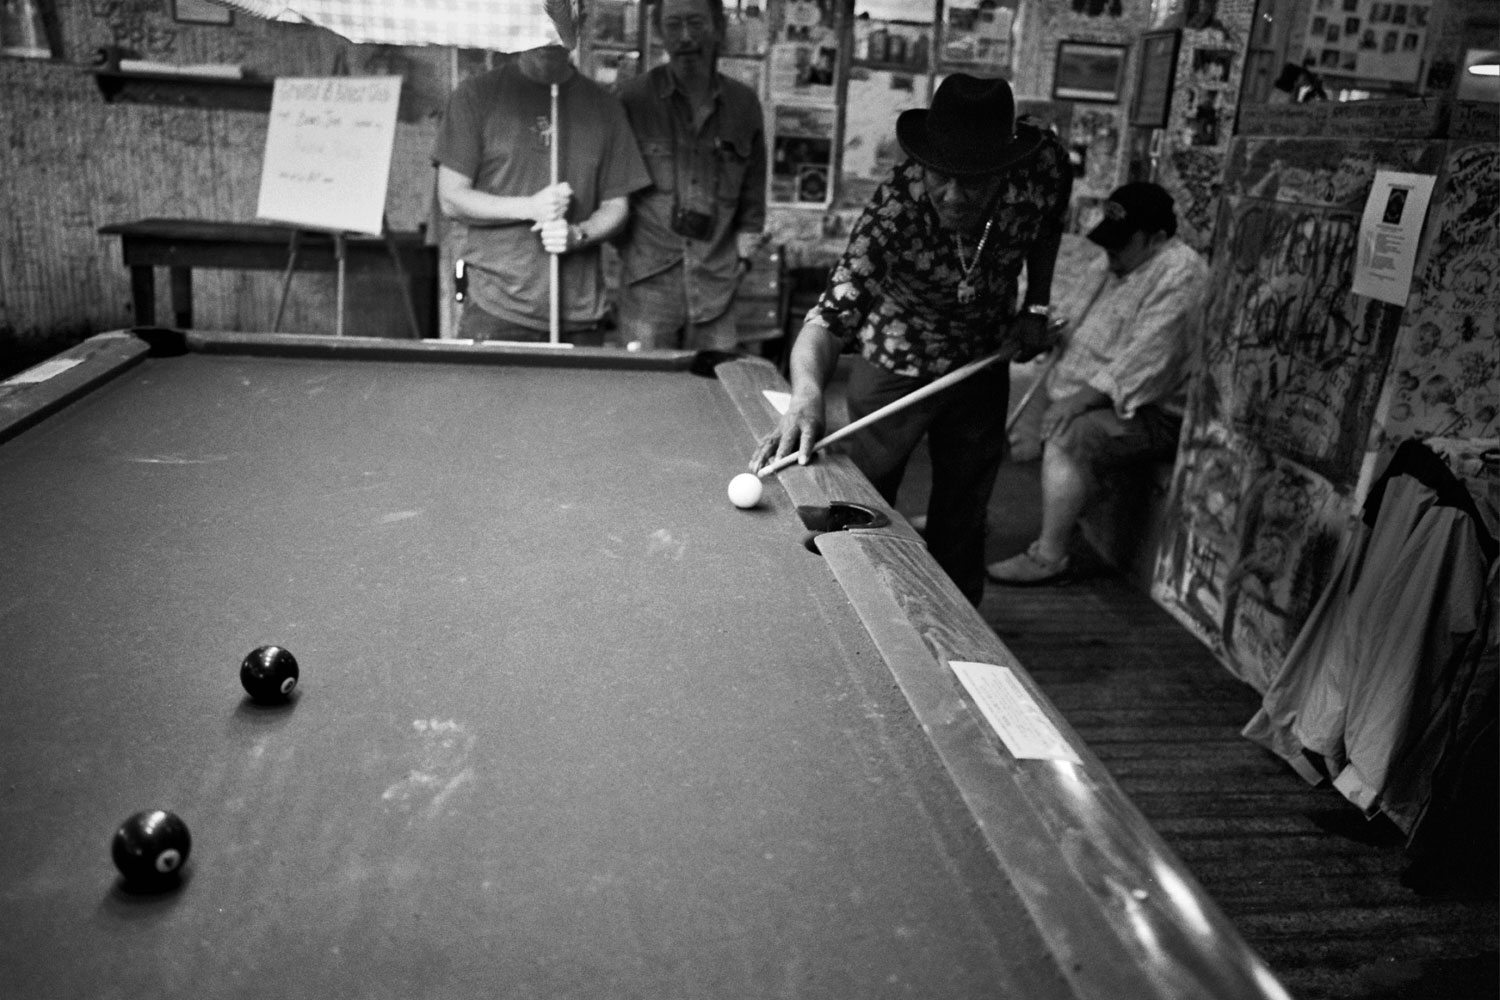 Schekter Lee, Doug Newcomb and Chuck Tannert playing pool at Ground Zero Blues Club in Clarksdale, Miss.